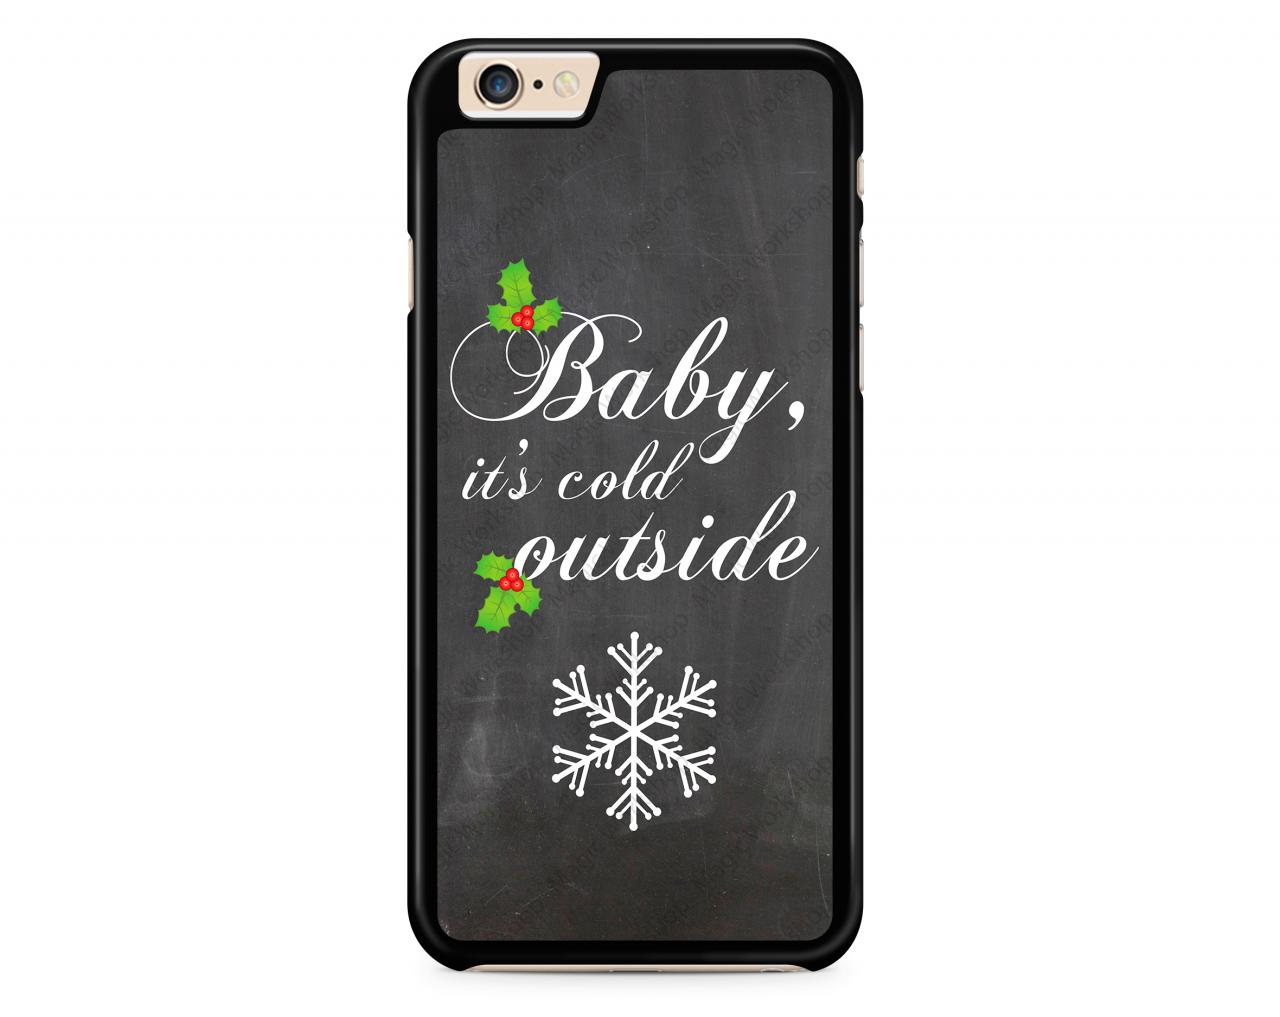 Baby Its Cold Outside, Snowflake Case For Iphone 4 4s 5 5s 5c 6 6 Plus 6s 6s Plus, Samsung Galaxy S3 S4 S5 S6 S6 Edge S7 S7 Edge Lg G3, Lg G4,